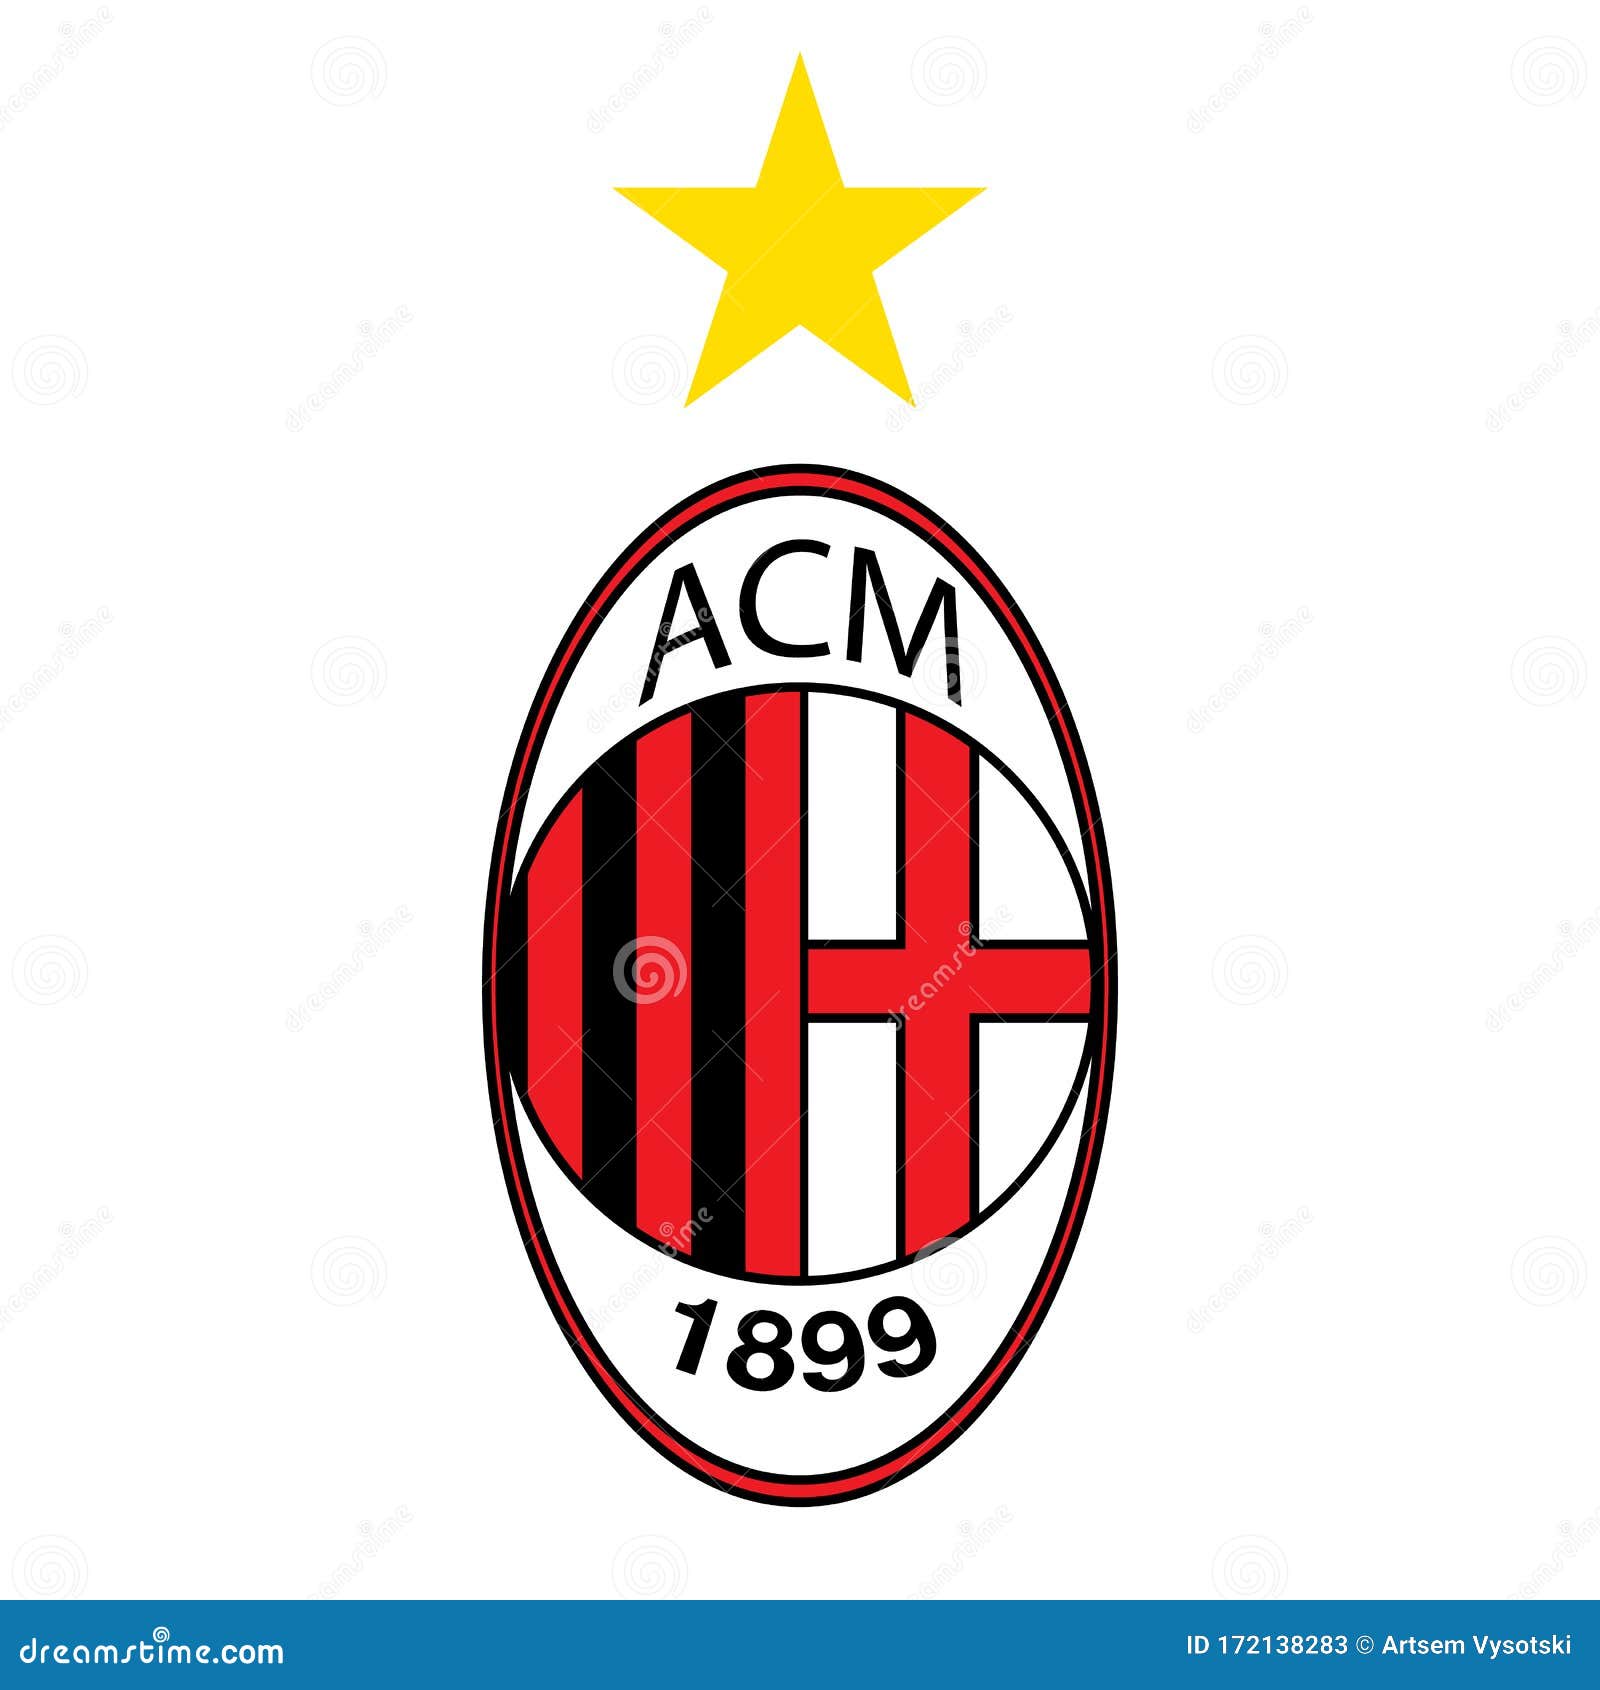 Milan Football Club Logo Vector Template With Gold Star. Professional